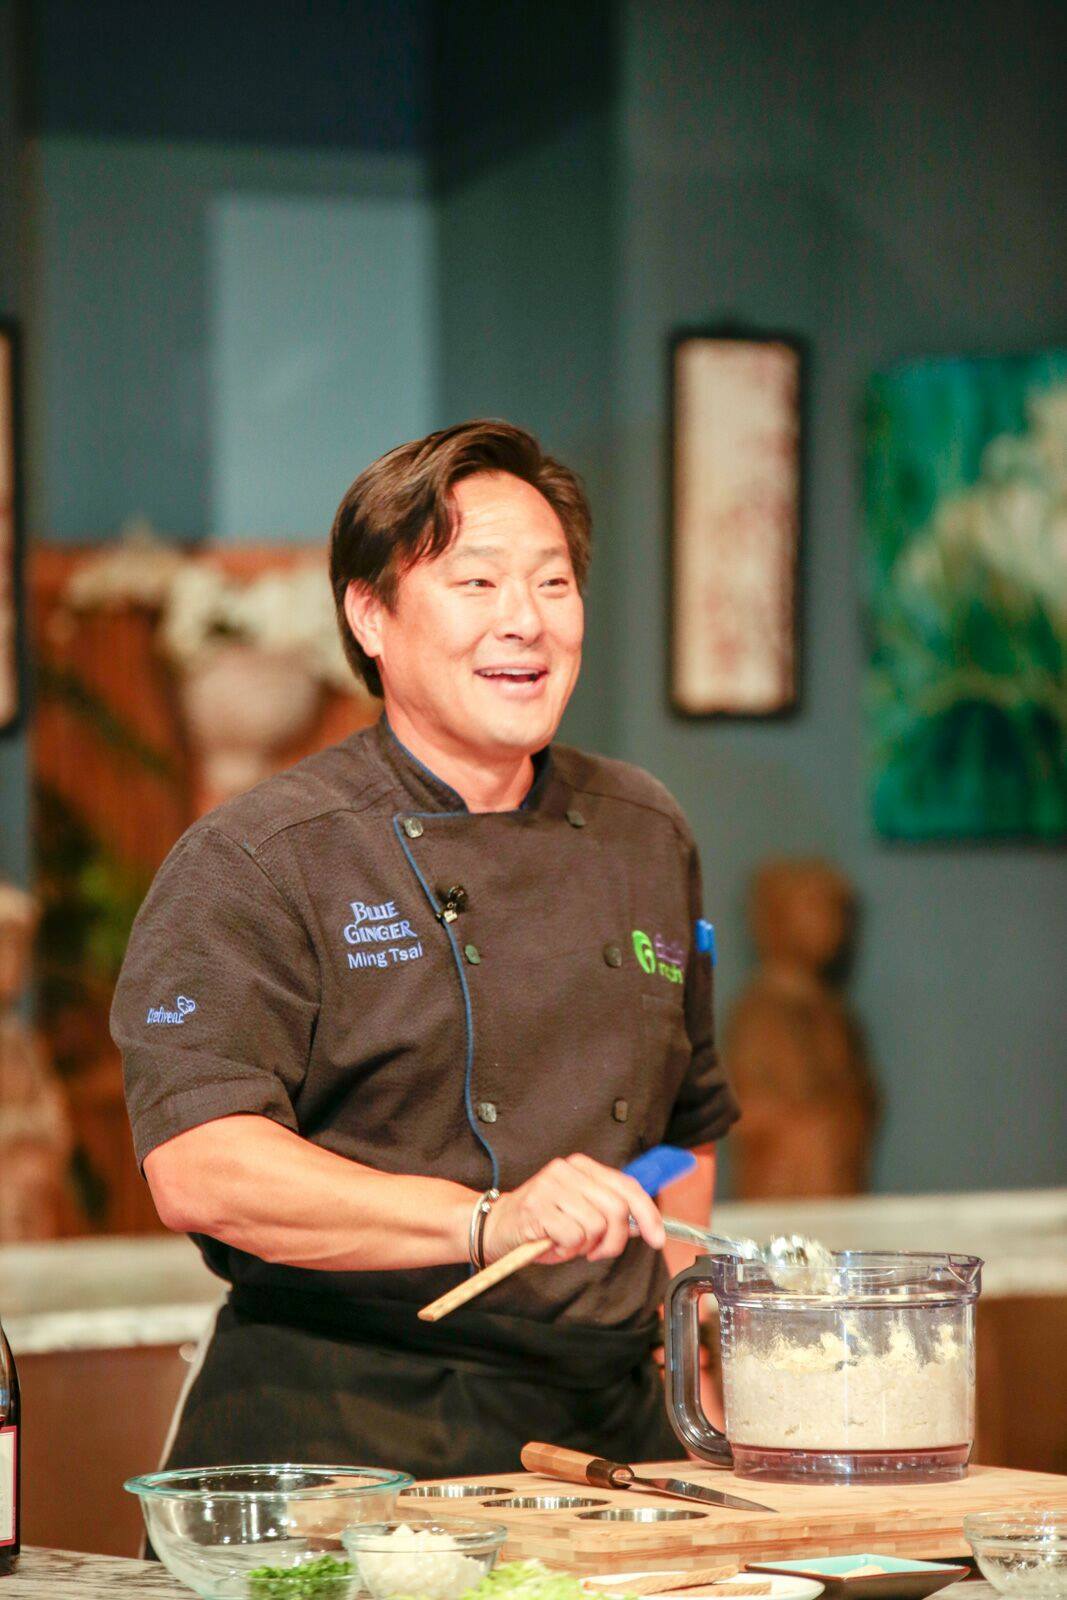 Chef Ming Tsai entertained Clarke guests with his culinary demonstration and quick wit.